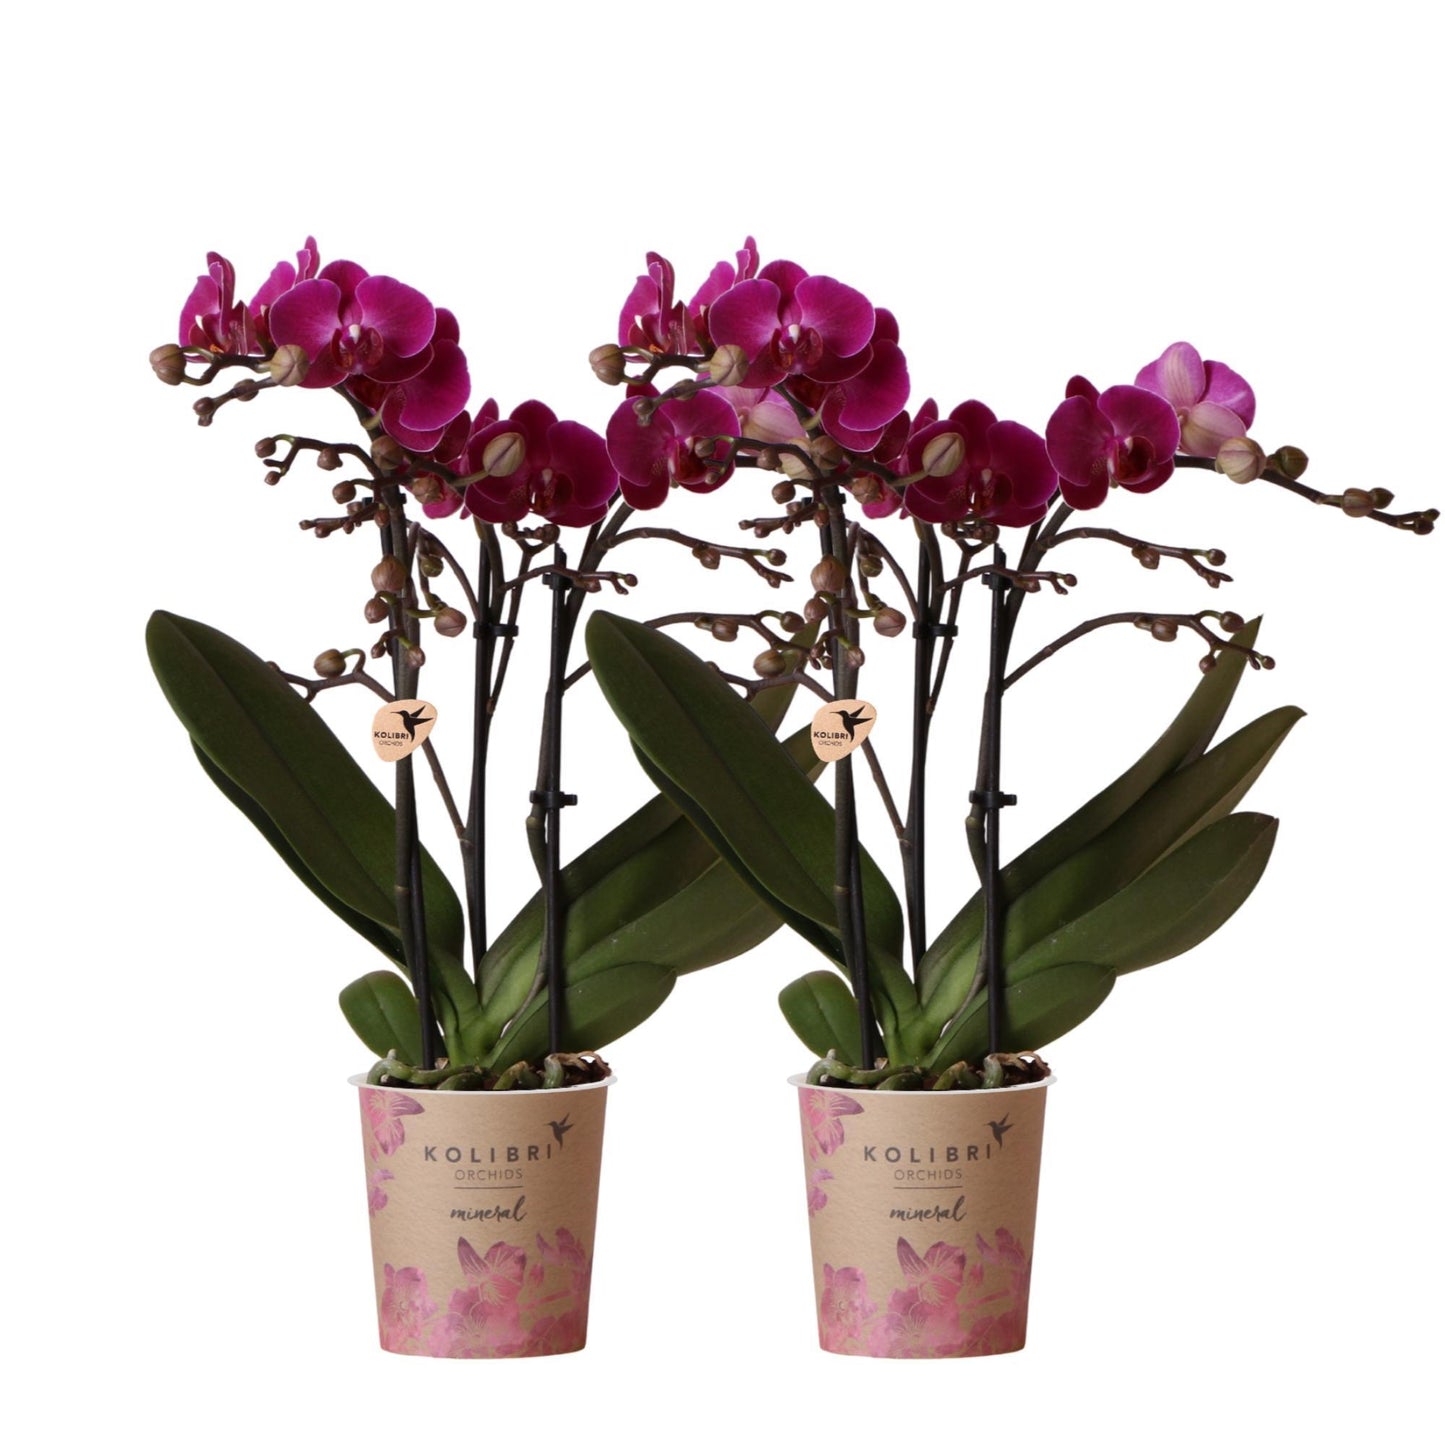 Hummingbird Orchids | COMBI DEAL of 2 purple phalaenopsis orchids - Morelia - pot size Ø9cm | flowering houseplant - fresh from the grower